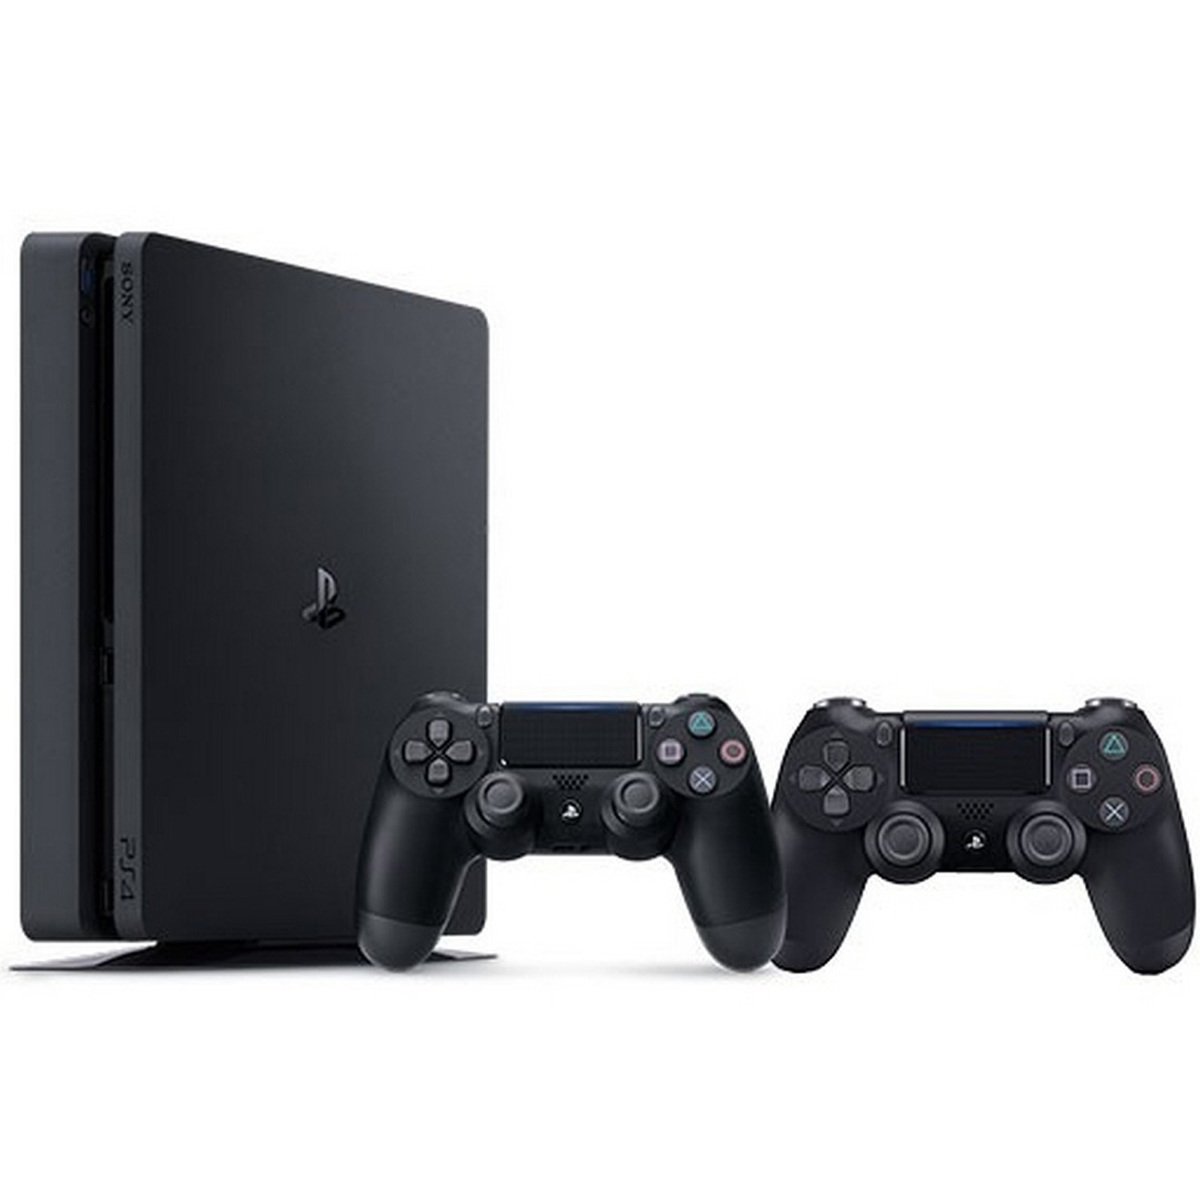 Sony PS4  Slim Console 1TB Black + FiFa18 + Extra DS4 Controller